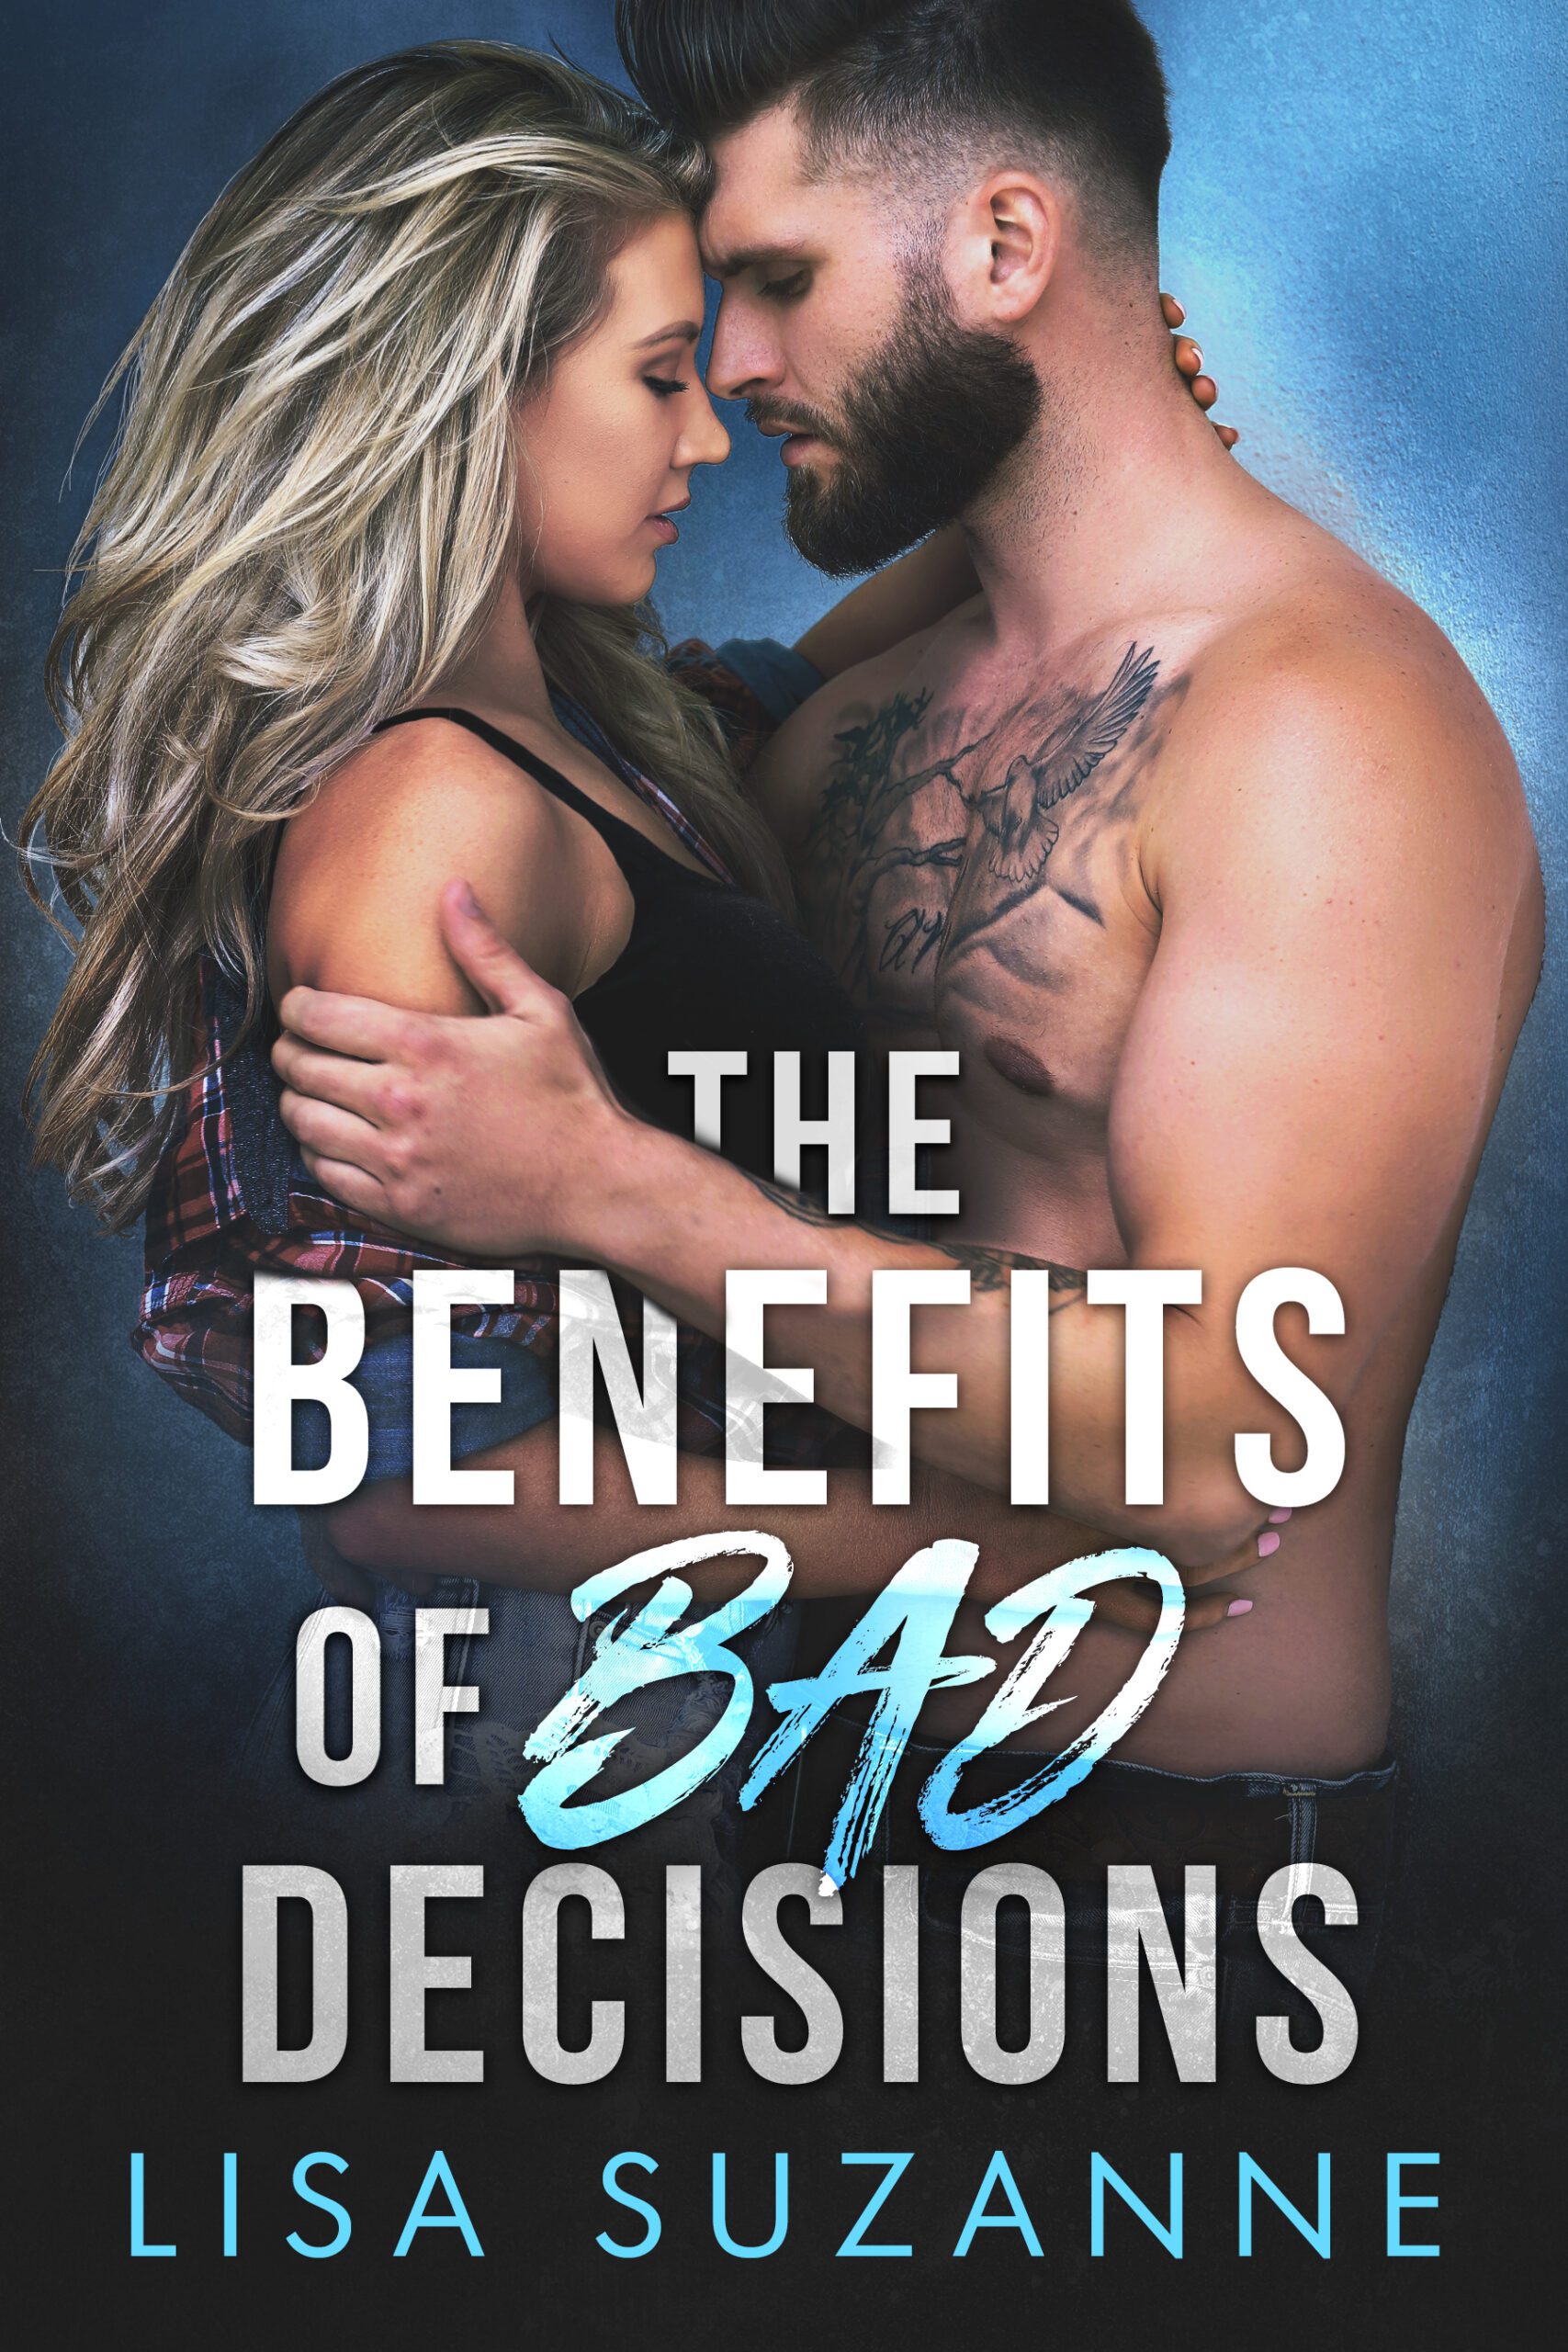 THE BENEFITS OF BAD DECISIONS – LISA SUZANNE